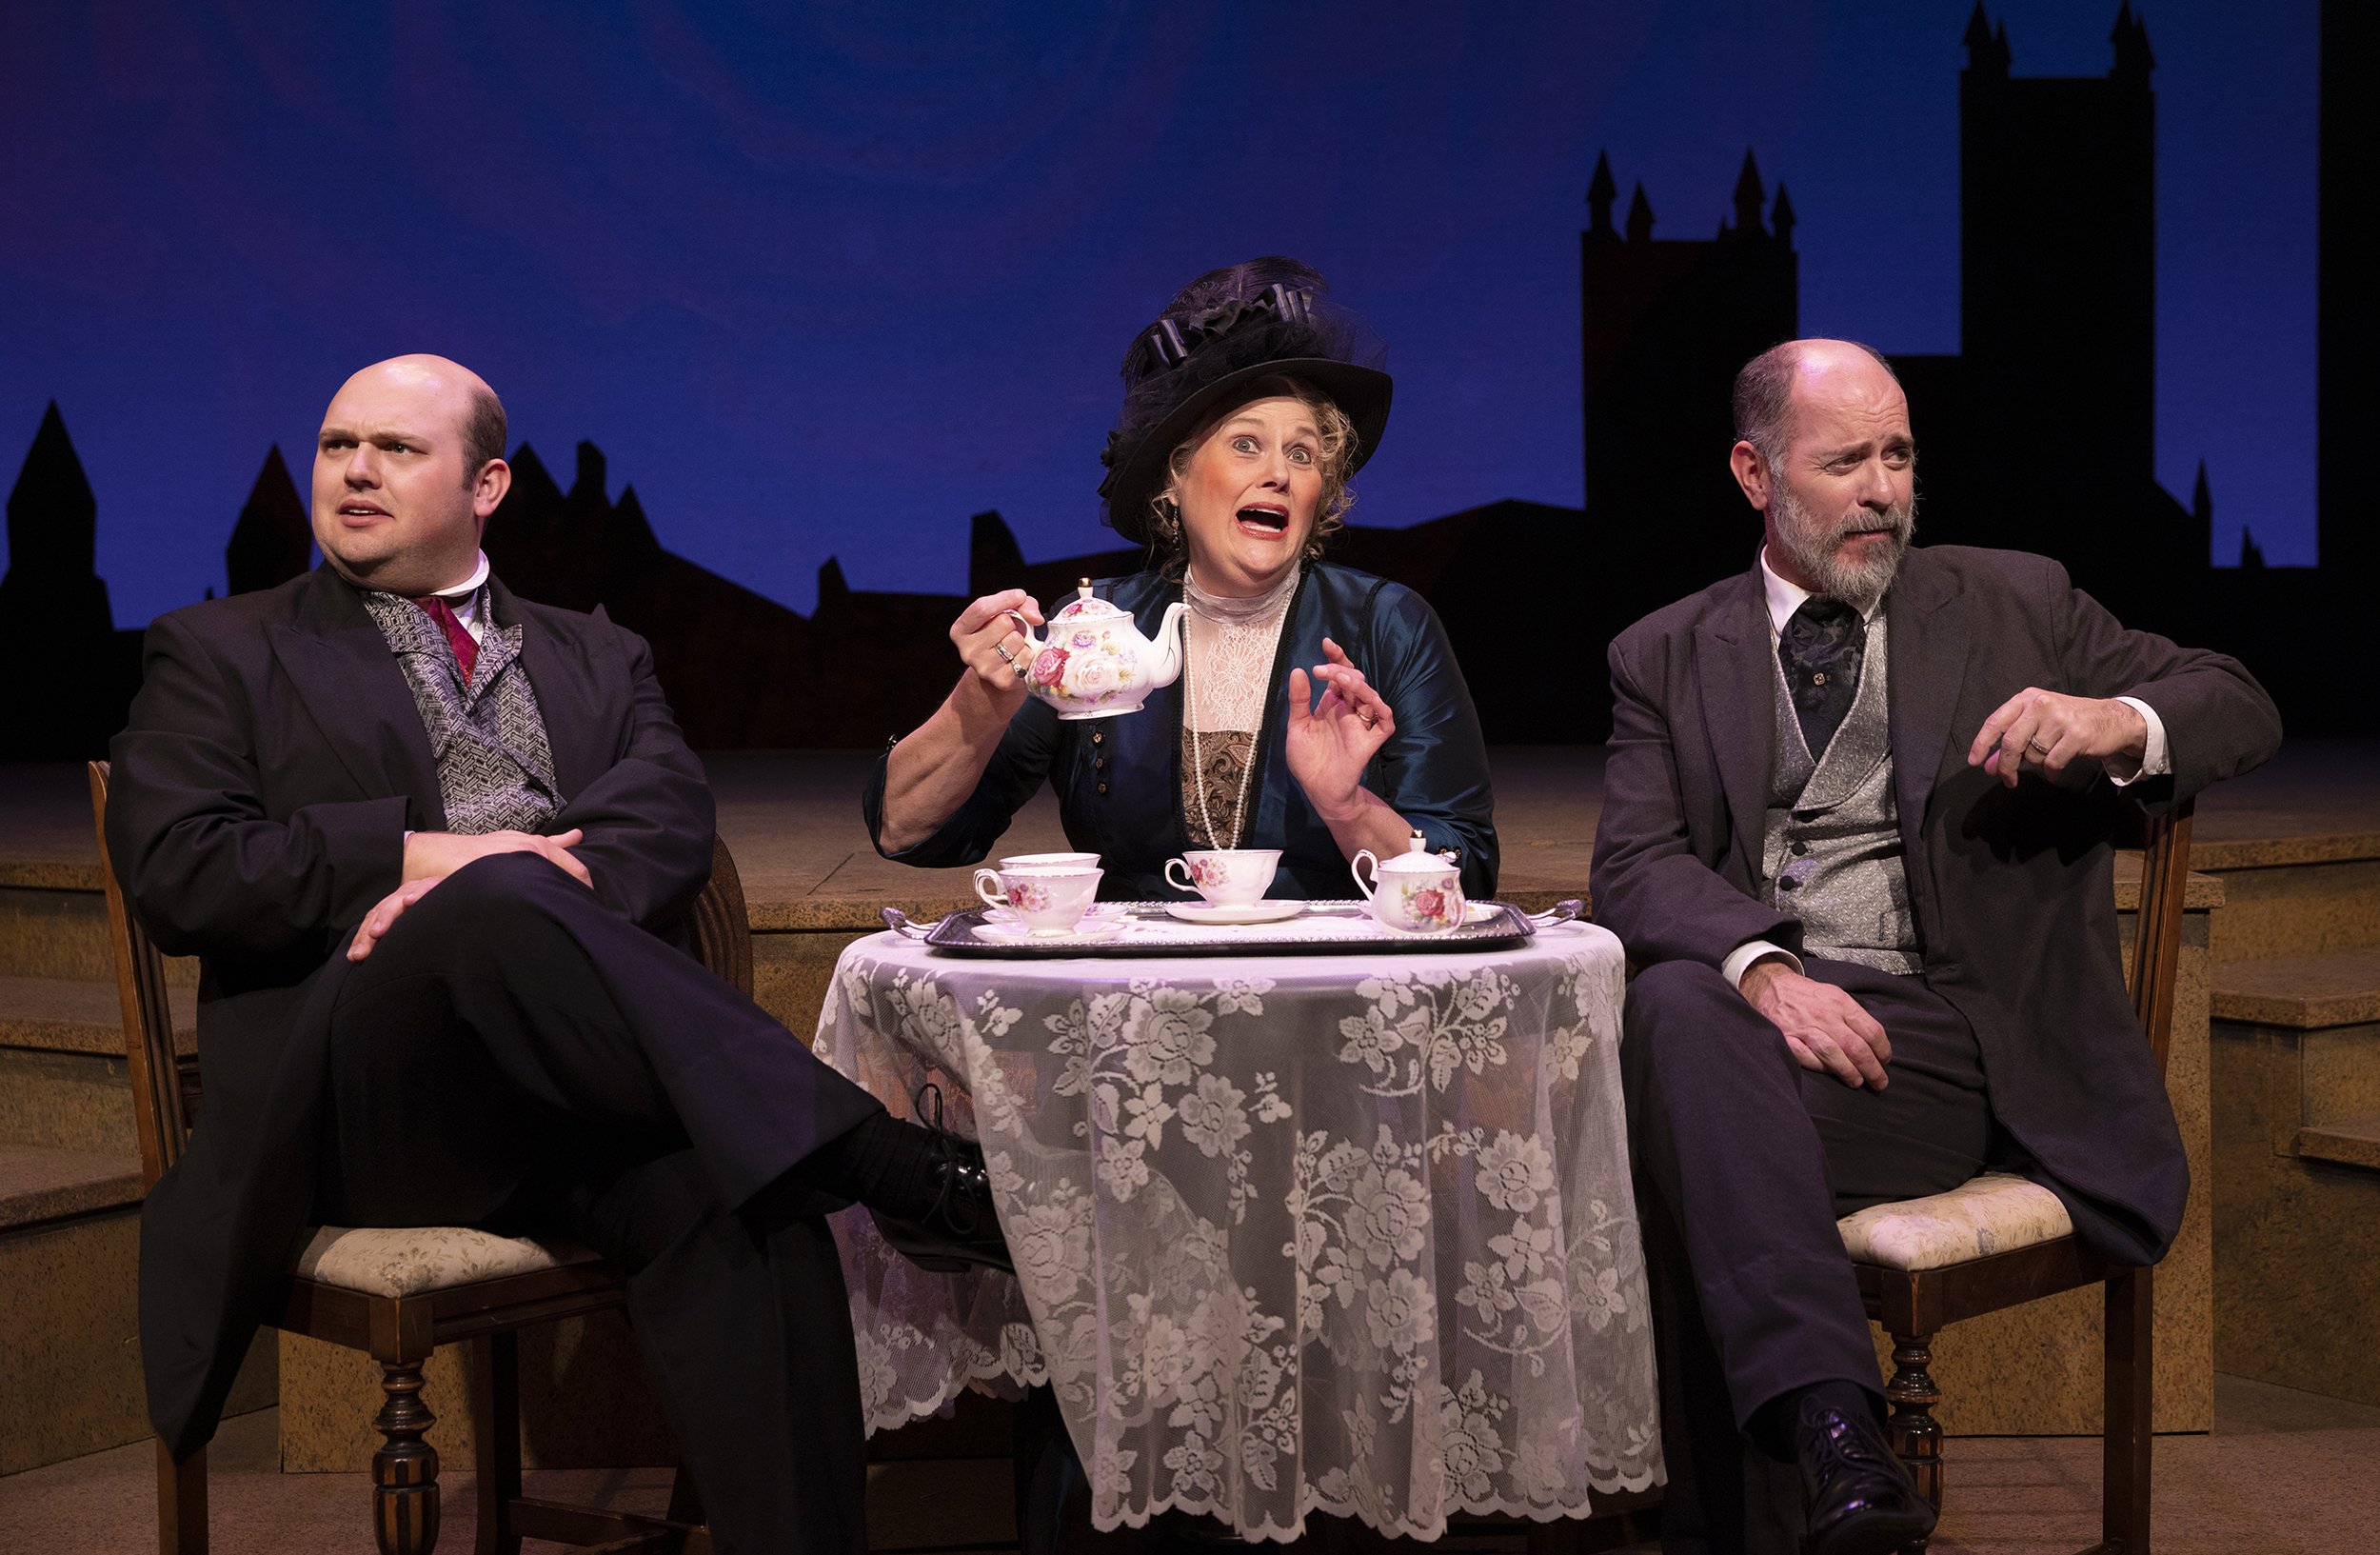 Tyler Page  as Hugh Whitbread, Teri Lee Thomas as Lady Millicent Bruton, and Michael Levin as Richard Dalloway. Photo by Tim Fuller.